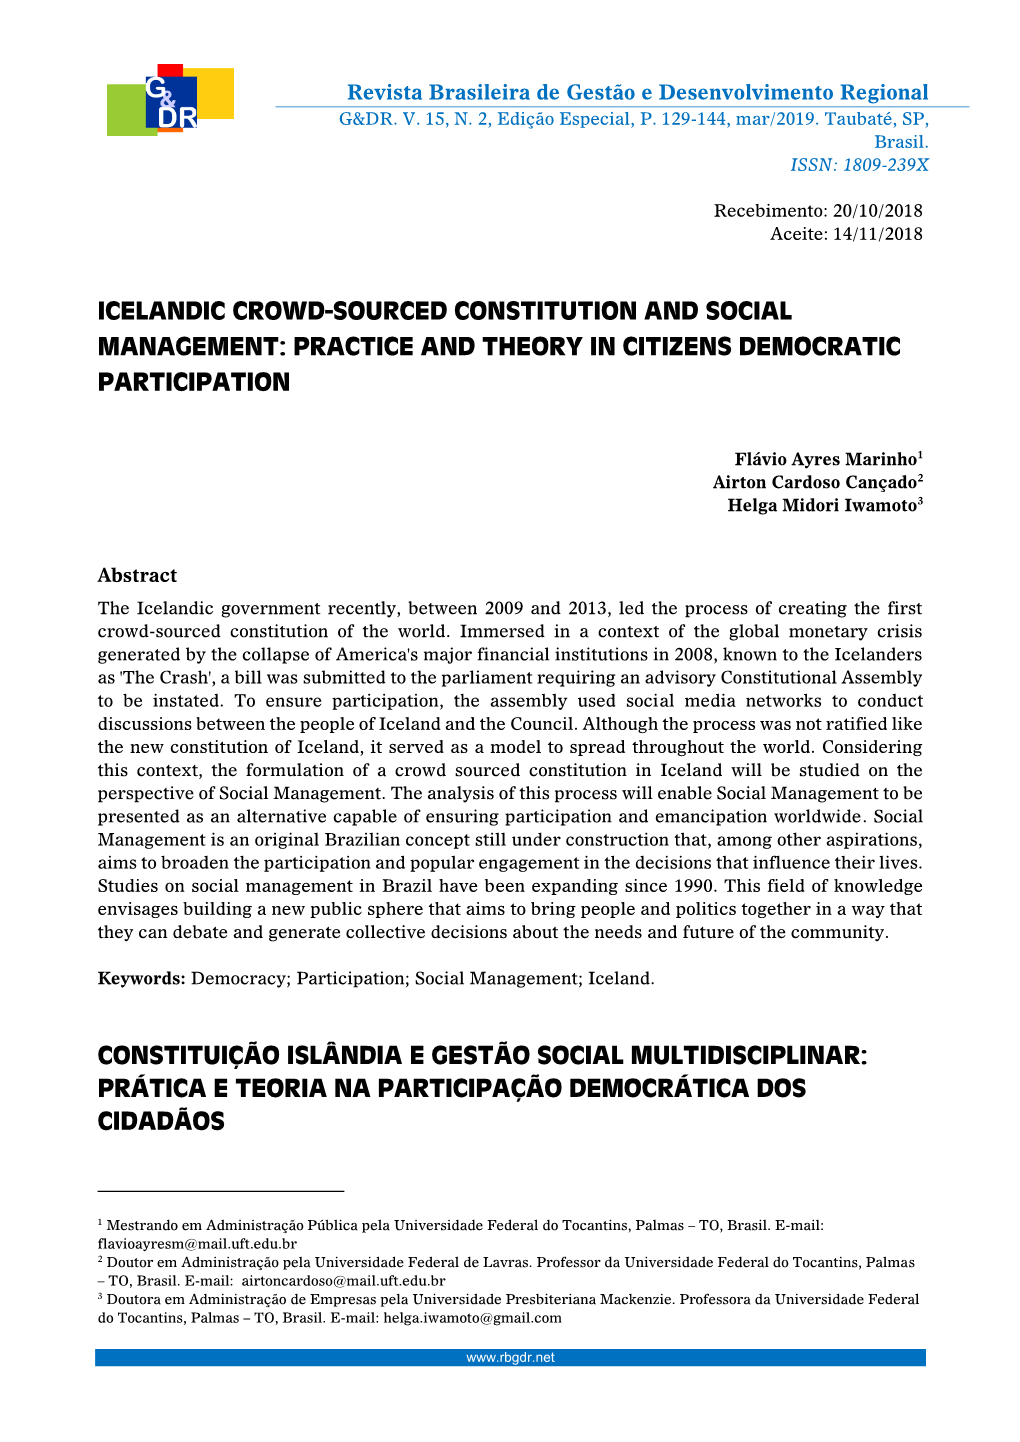 Icelandic Crowd-Sourced Constitution and Social Management: Practice and Theory in Citizens Democratic Participation Constituiç